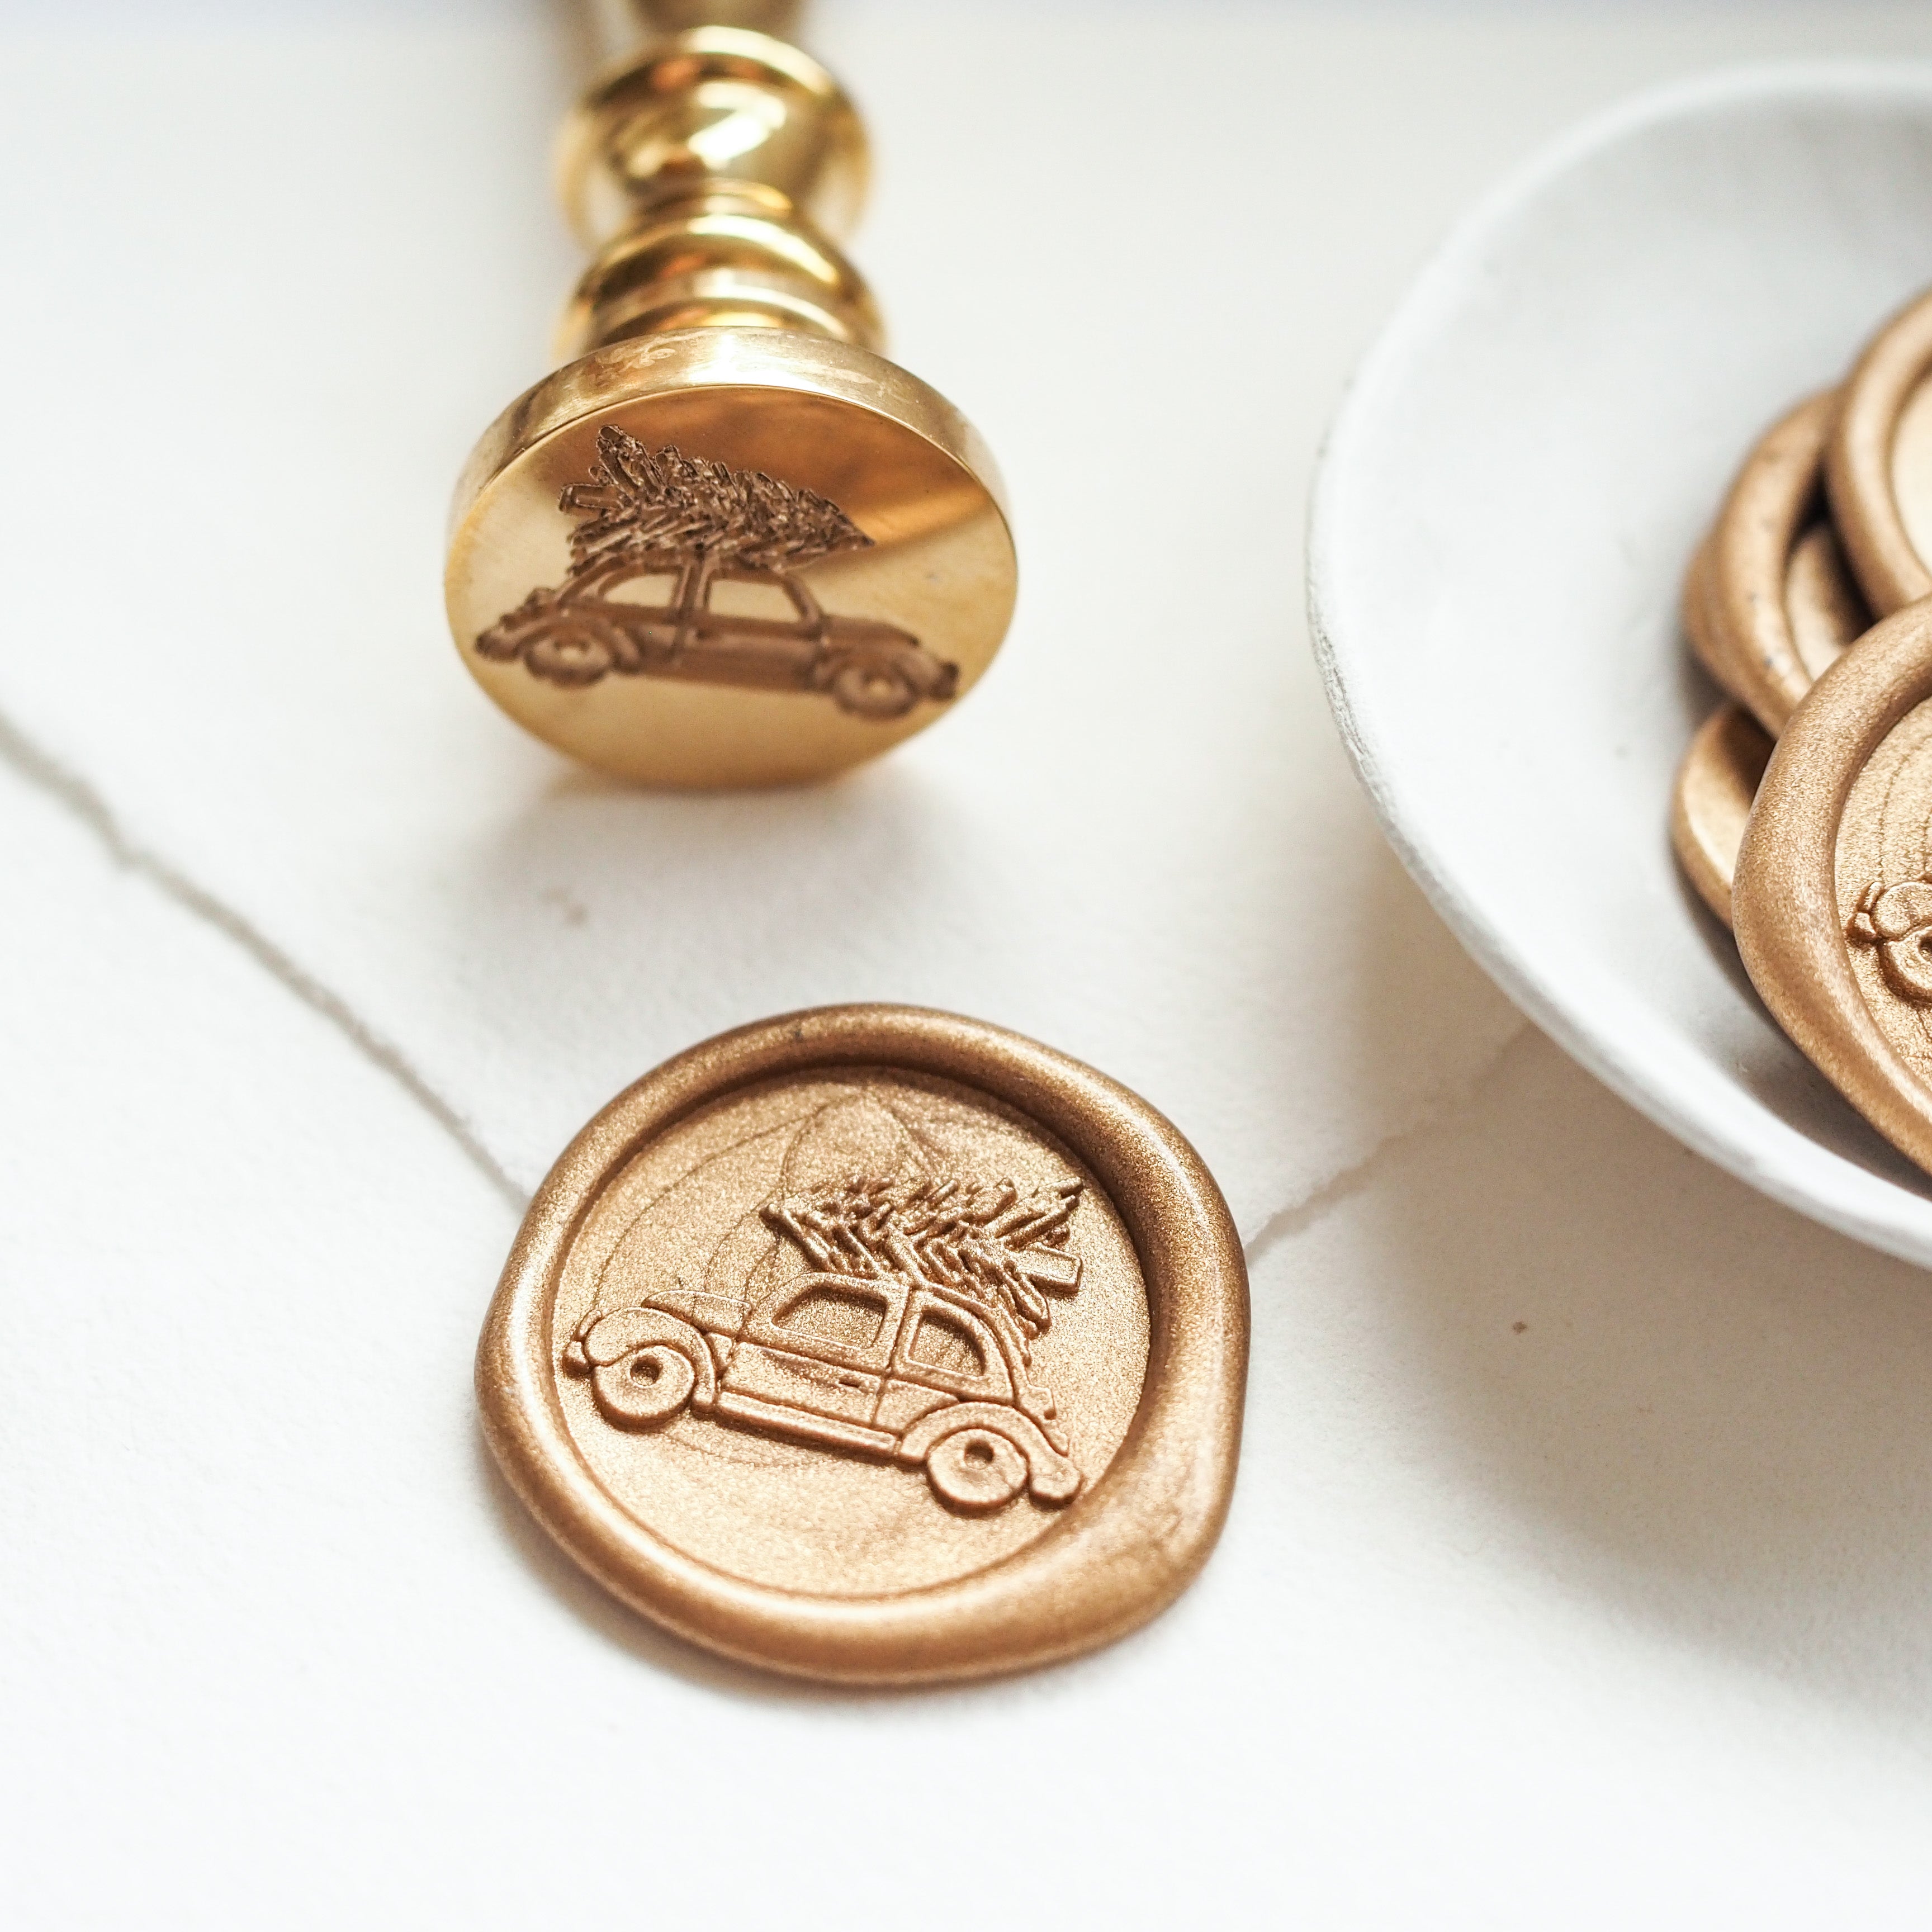 9ct Christmas Gold Wax Seal Stickers by Park Lane